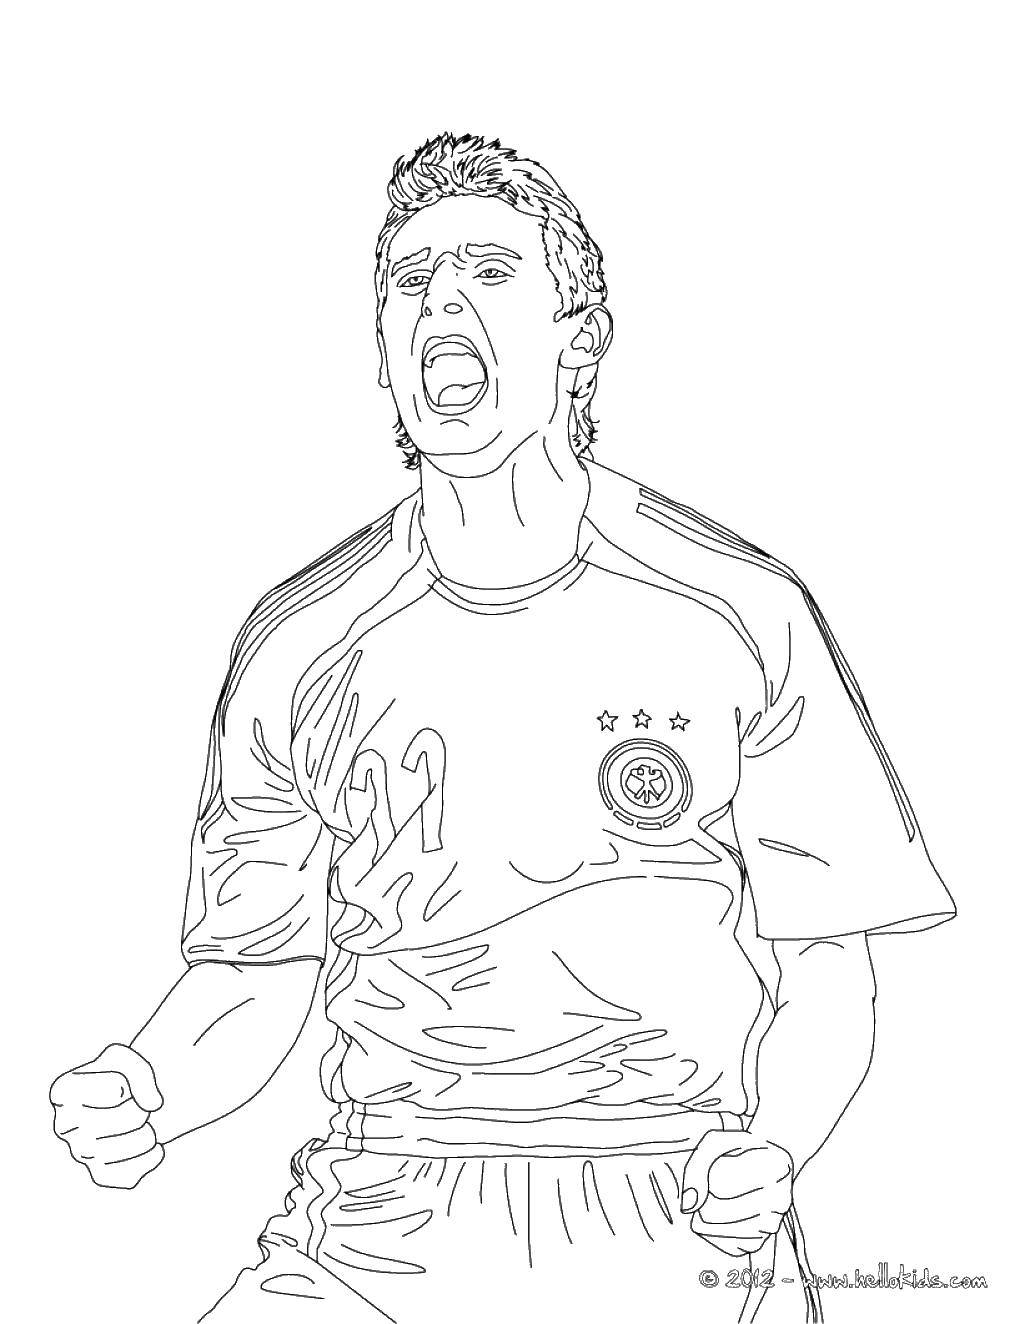 Coloring Gooool!. Category Football. Tags:  Sports, soccer, ball, game.